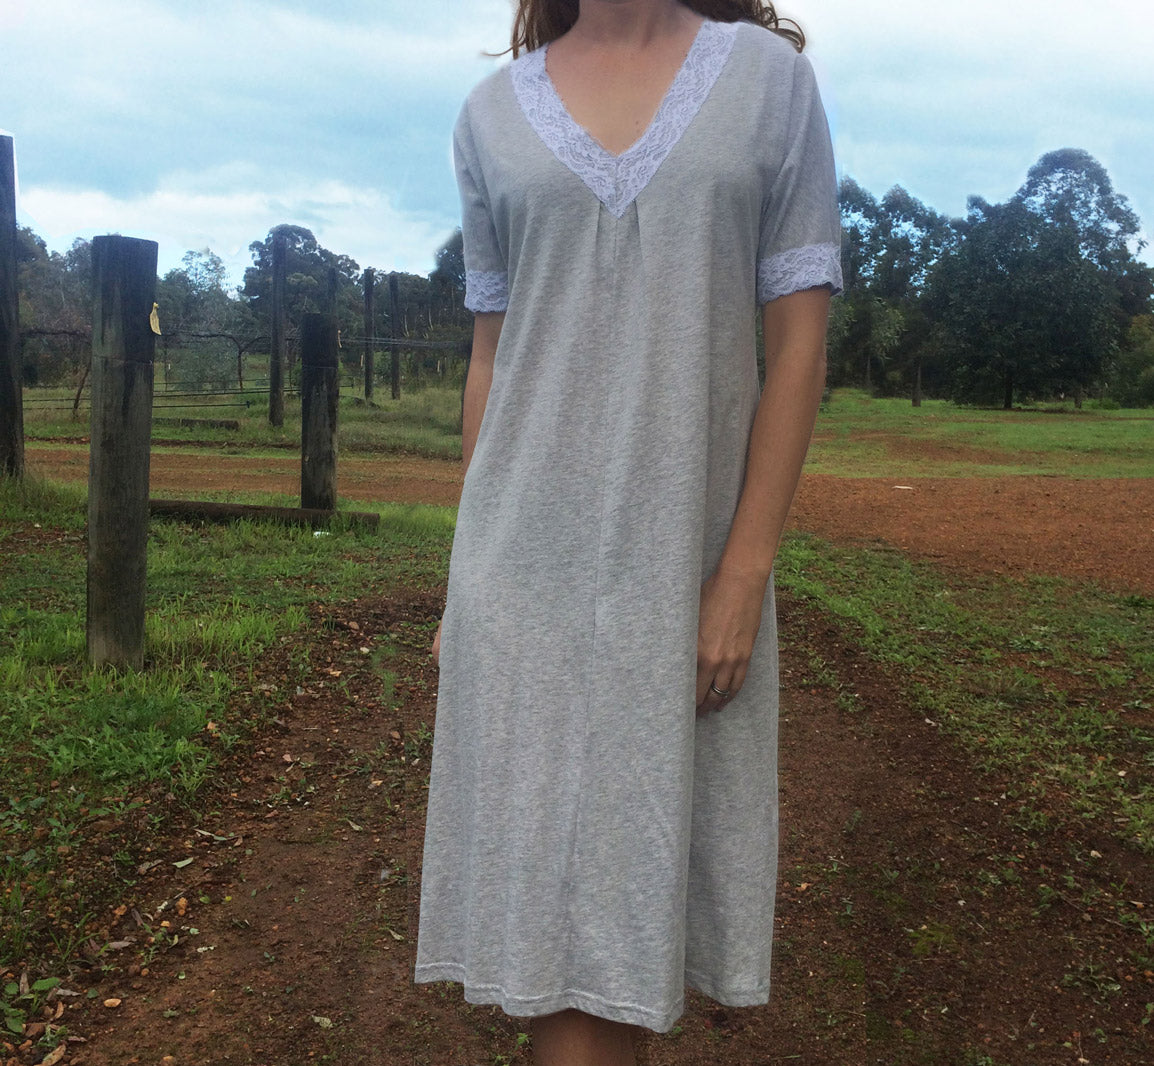 Plus size nighties Australia. Organic cotton and lace nightgown made in Australia.